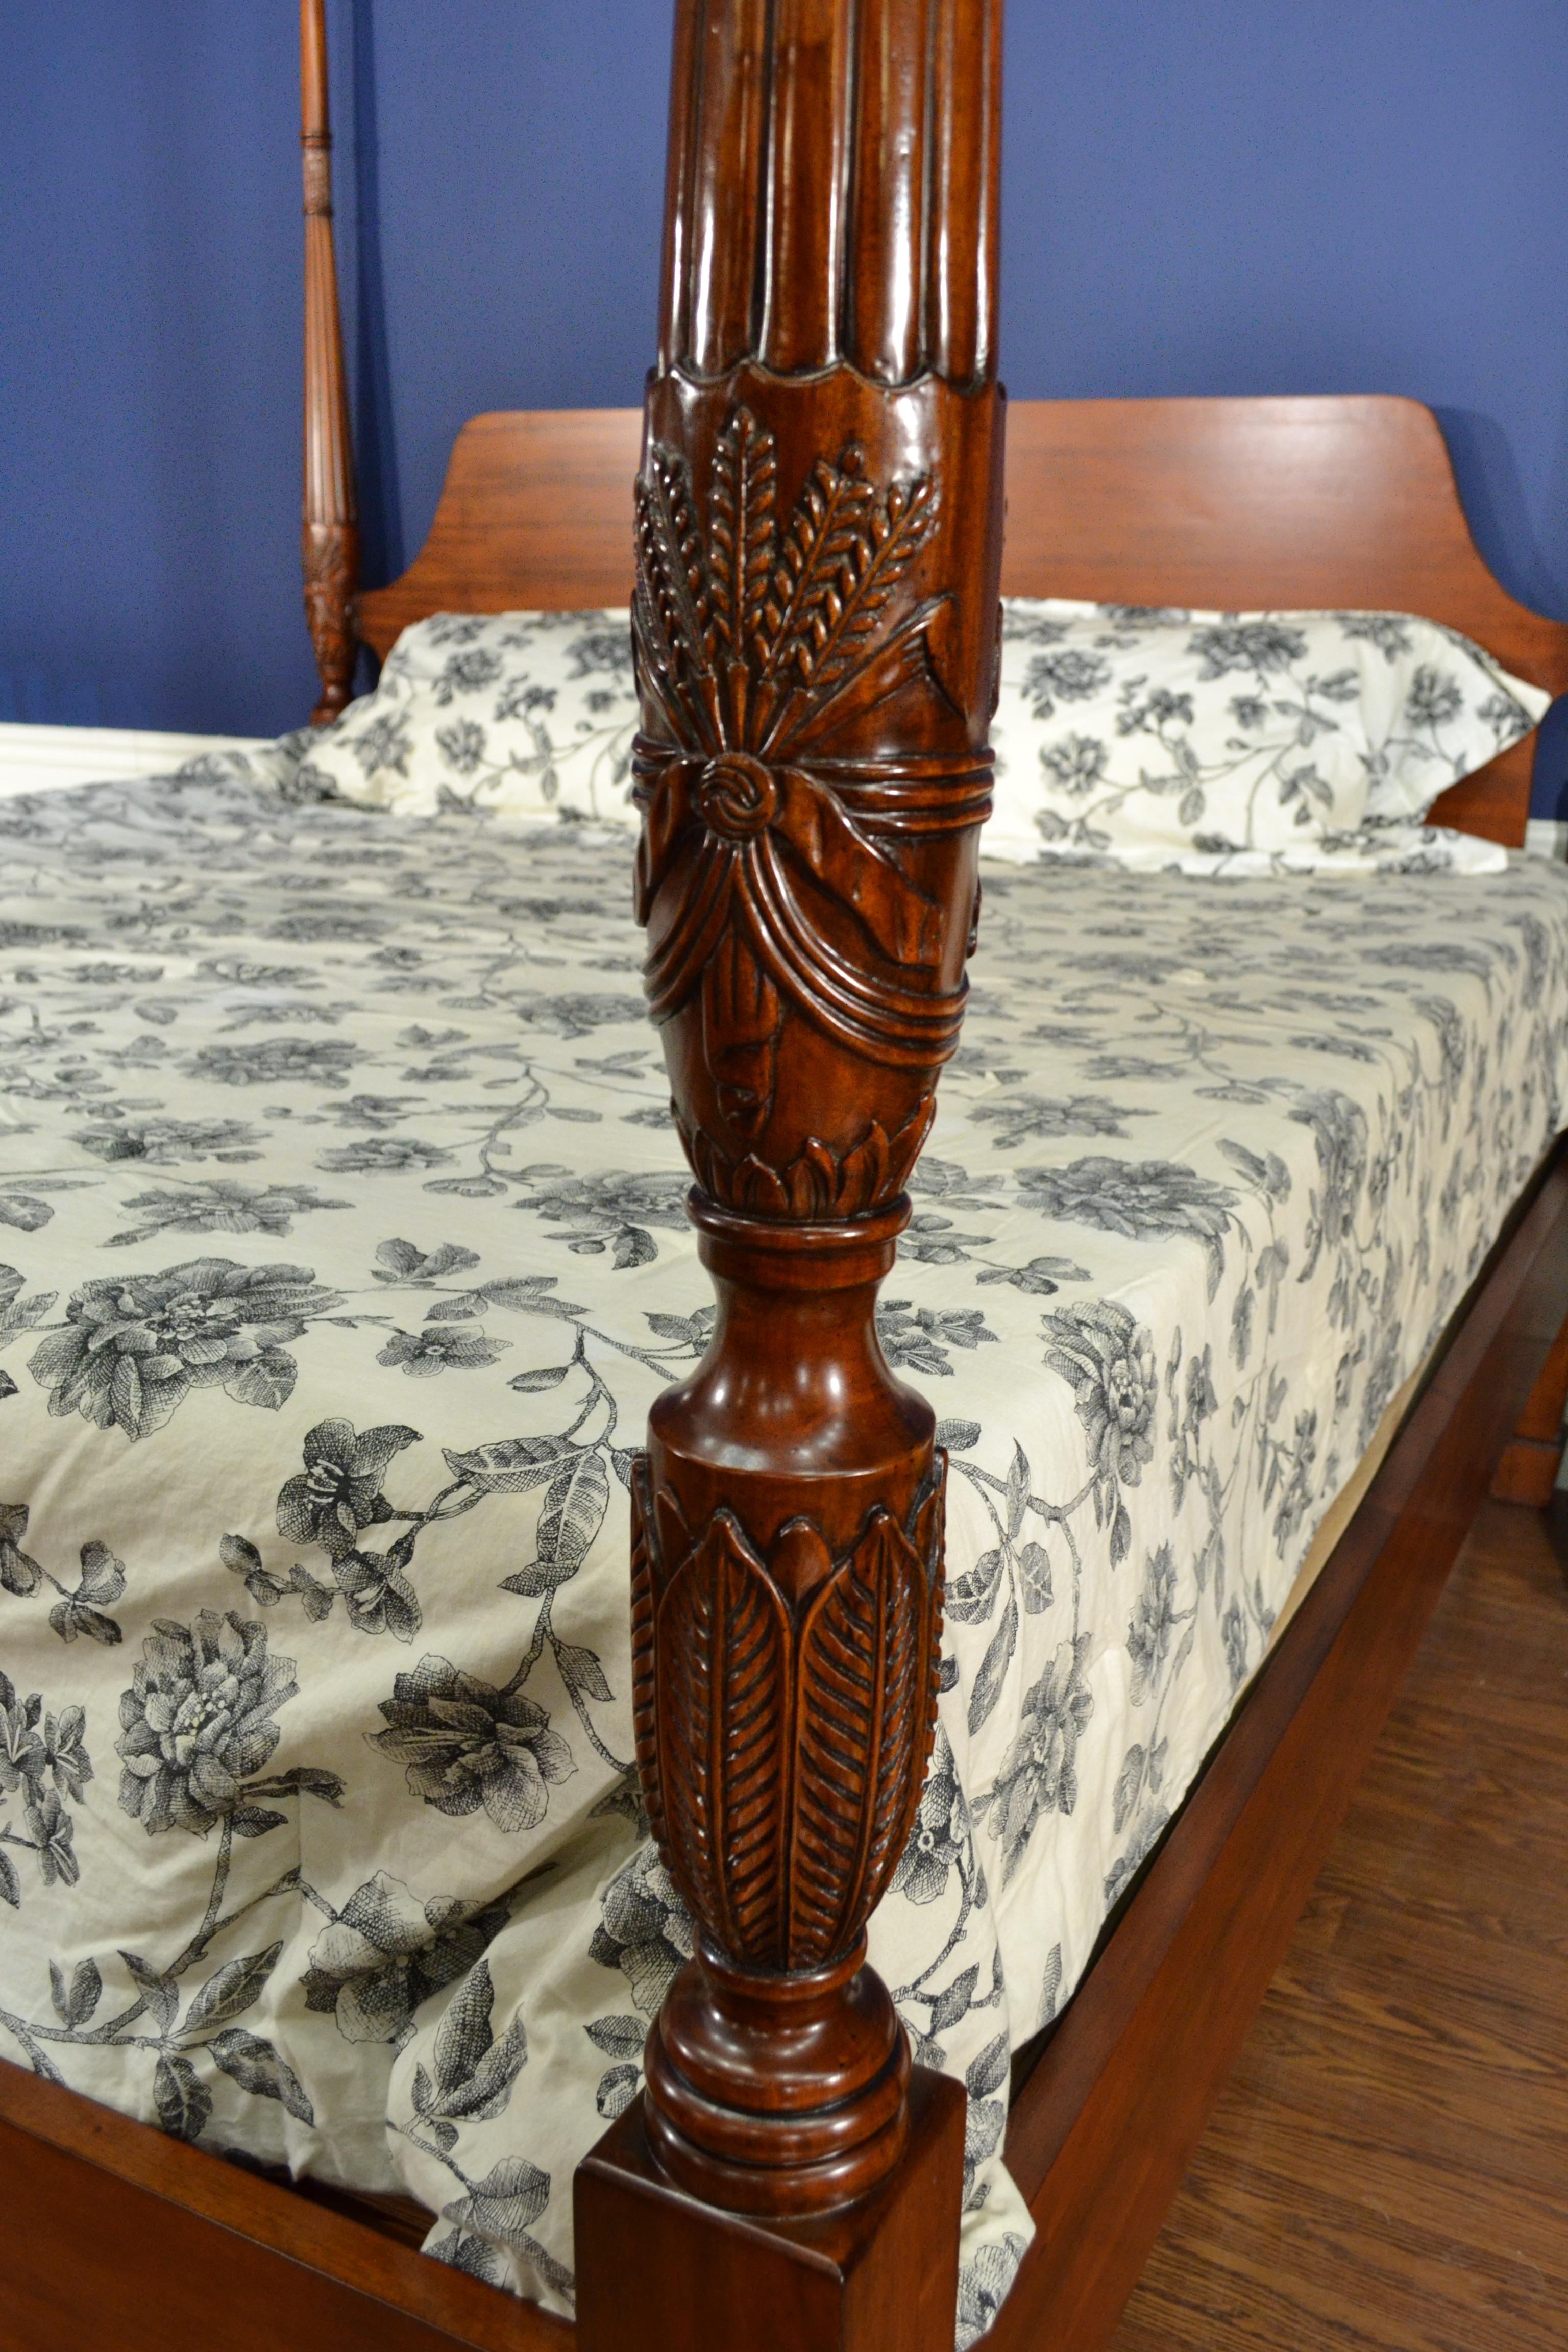 This is a new traditional queen size mahogany rice carved poster bed by Leighton Hall Furniture. It’s design was inspired by poster beds from the Regency period and features handmade rice carved posts which are fluted and tapered and a straight